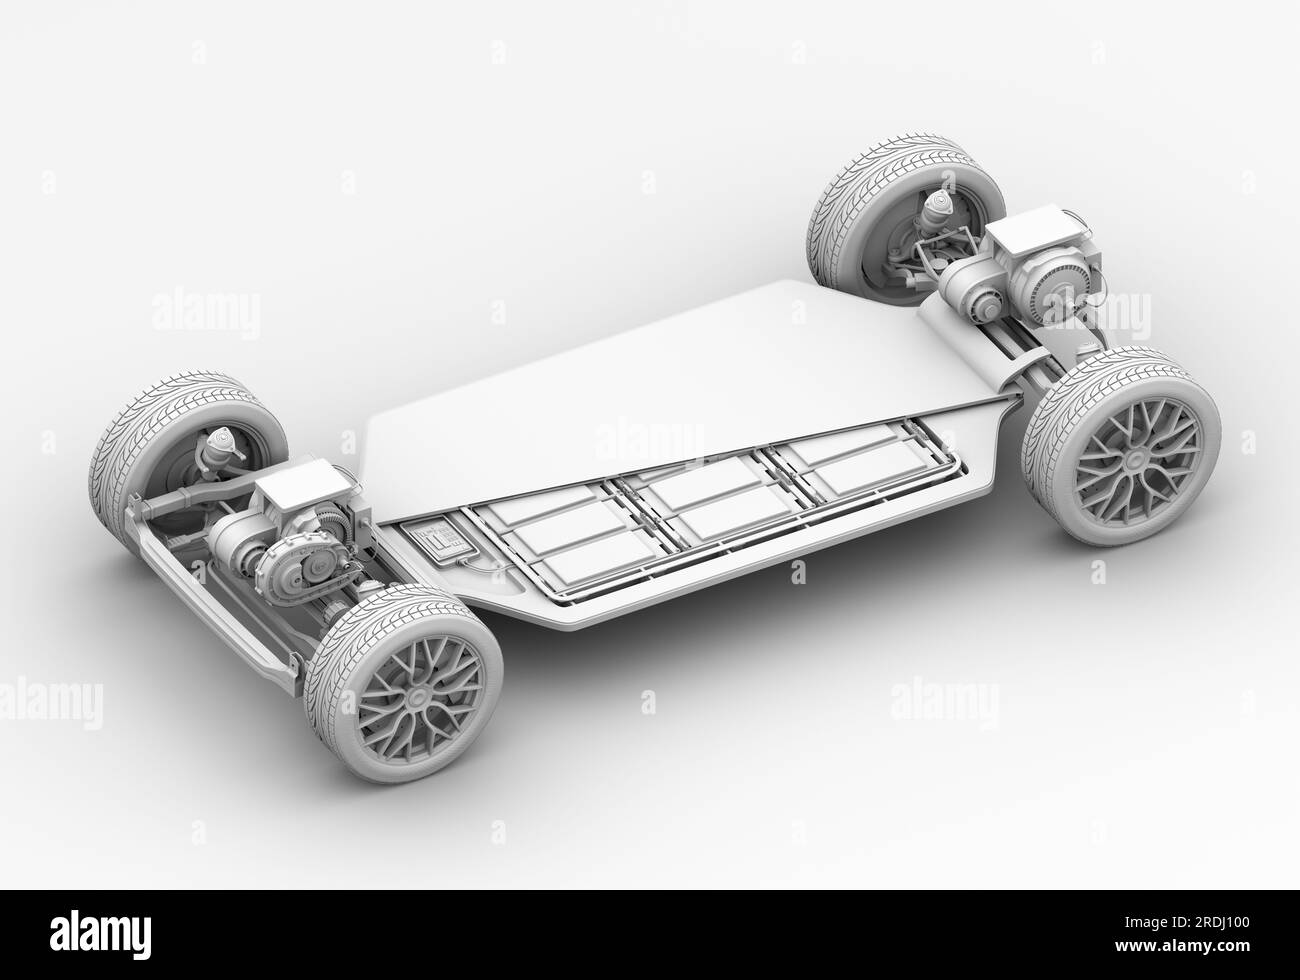 Clay rendering of Electric Vehicle Chassis with Dual Motors and Solid-state battery pack. Cutaway view. 3D rendering image. Stock Photo